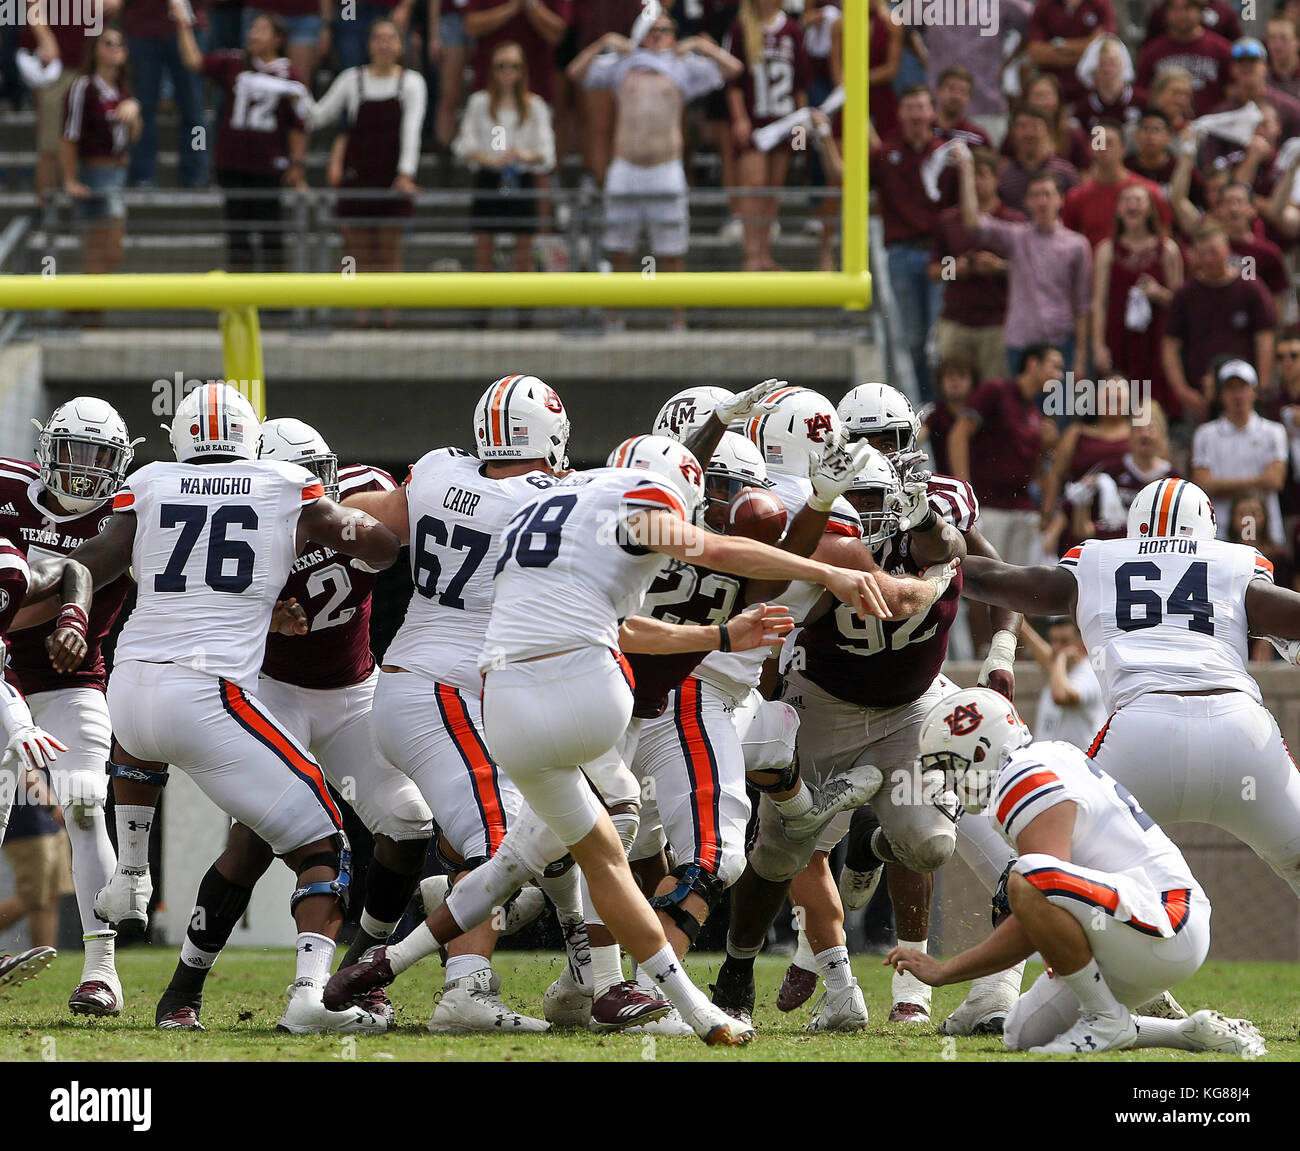 November 4, 2017: Texas A&M Aggies defensive back Armani Watts (23) blocks the kick of Auburn Tigers place kicker Daniel Carlson (38) in the third quarter during the NCAA football game between the Auburn Tigers and the Texas A&M Aggies at Kyle Field in College Station, TX; John Glaser/CSM. Stock Photo